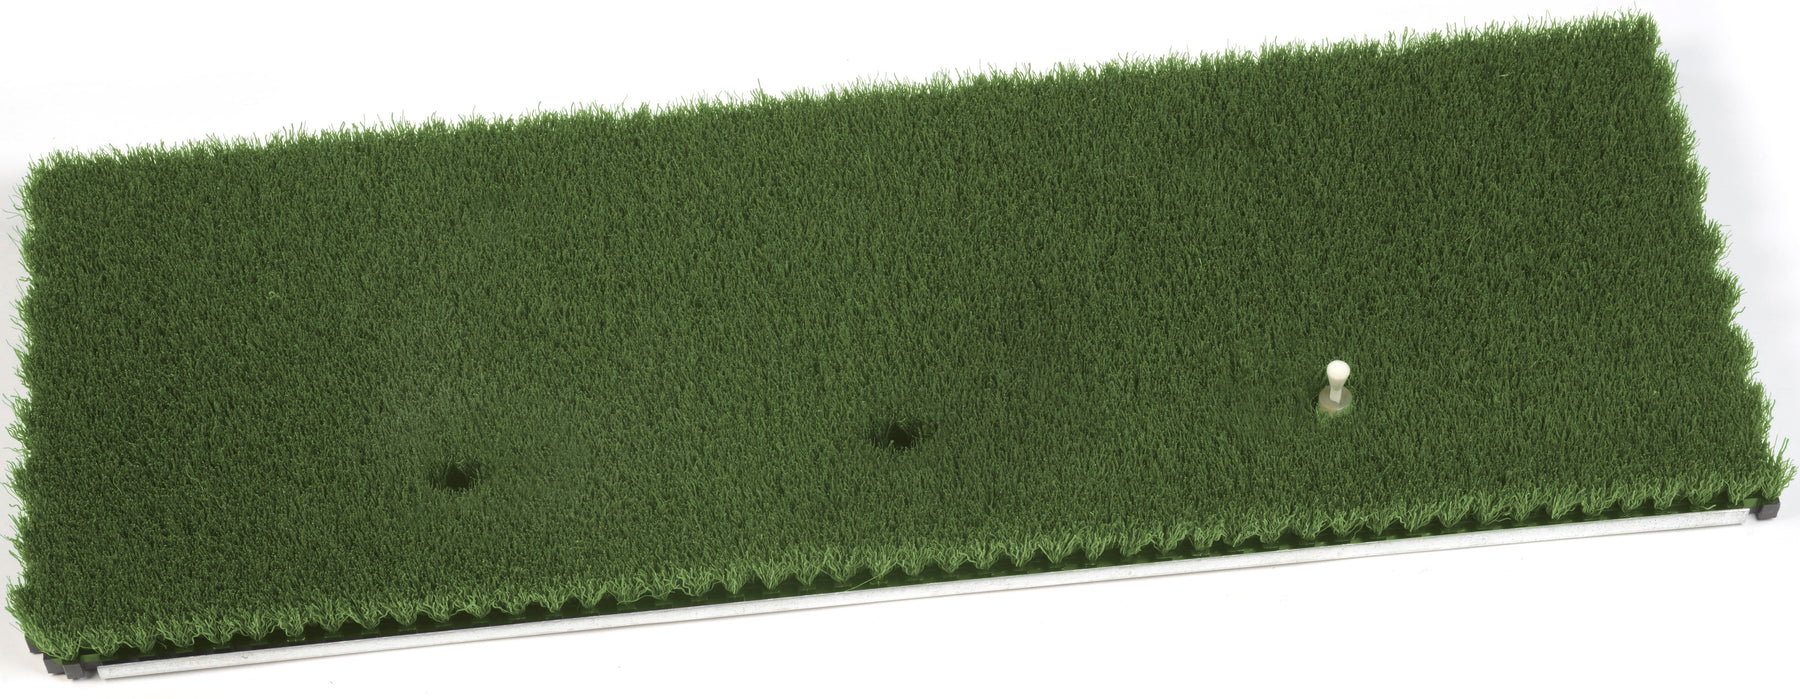 3 Foot Fiberbuilt Grass Panel with 3 tee holes - On Course Green